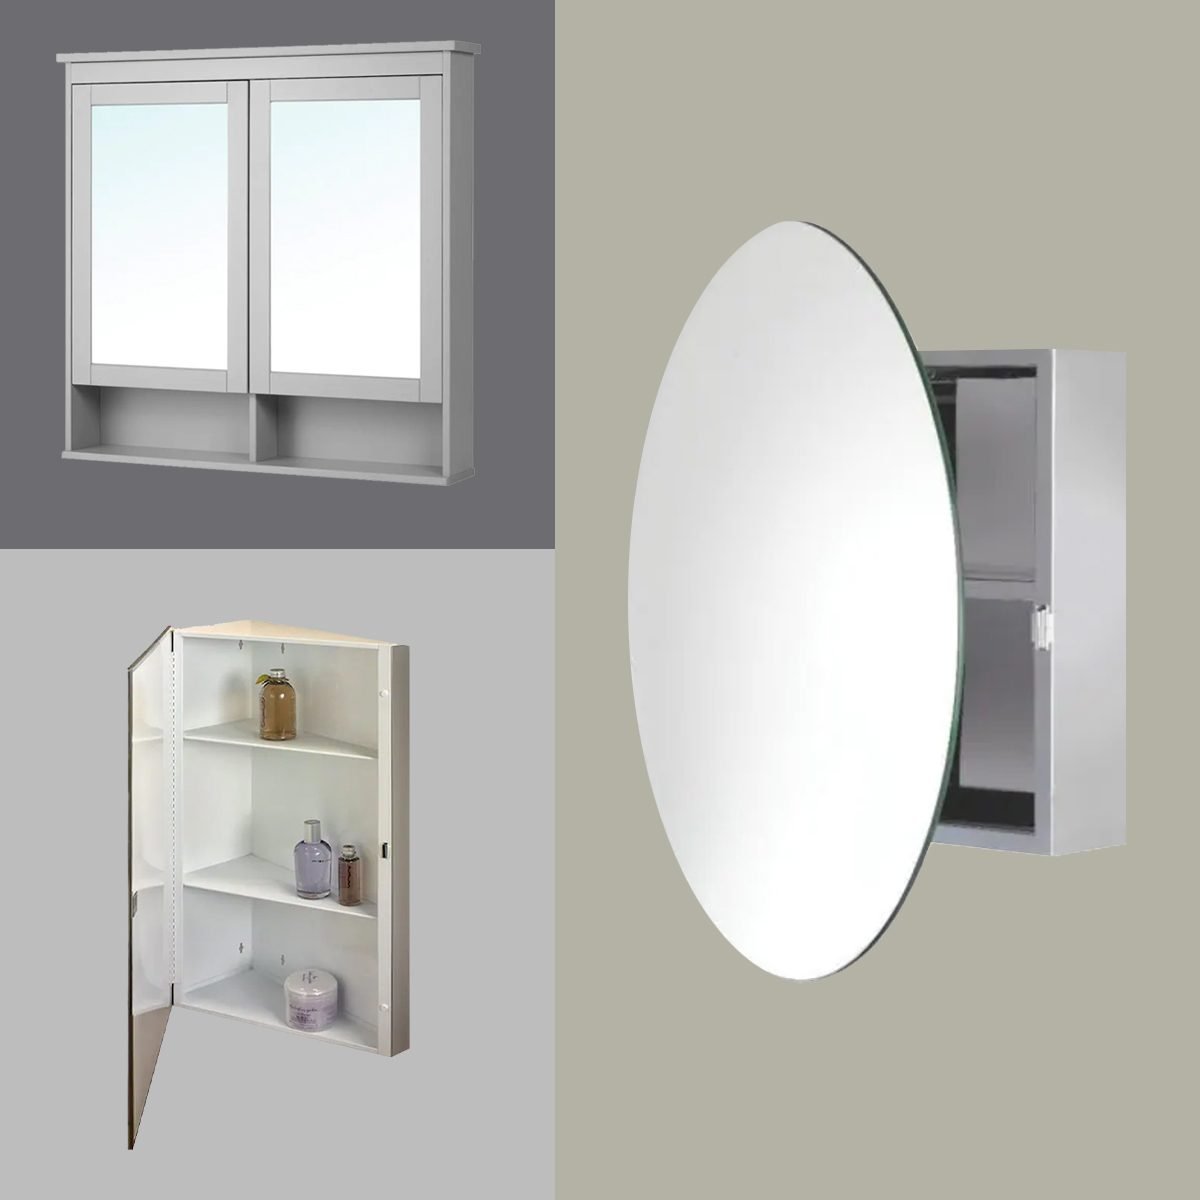 Best Rated Medicine Cabinets with Mirrors That Are Sleek & Functional